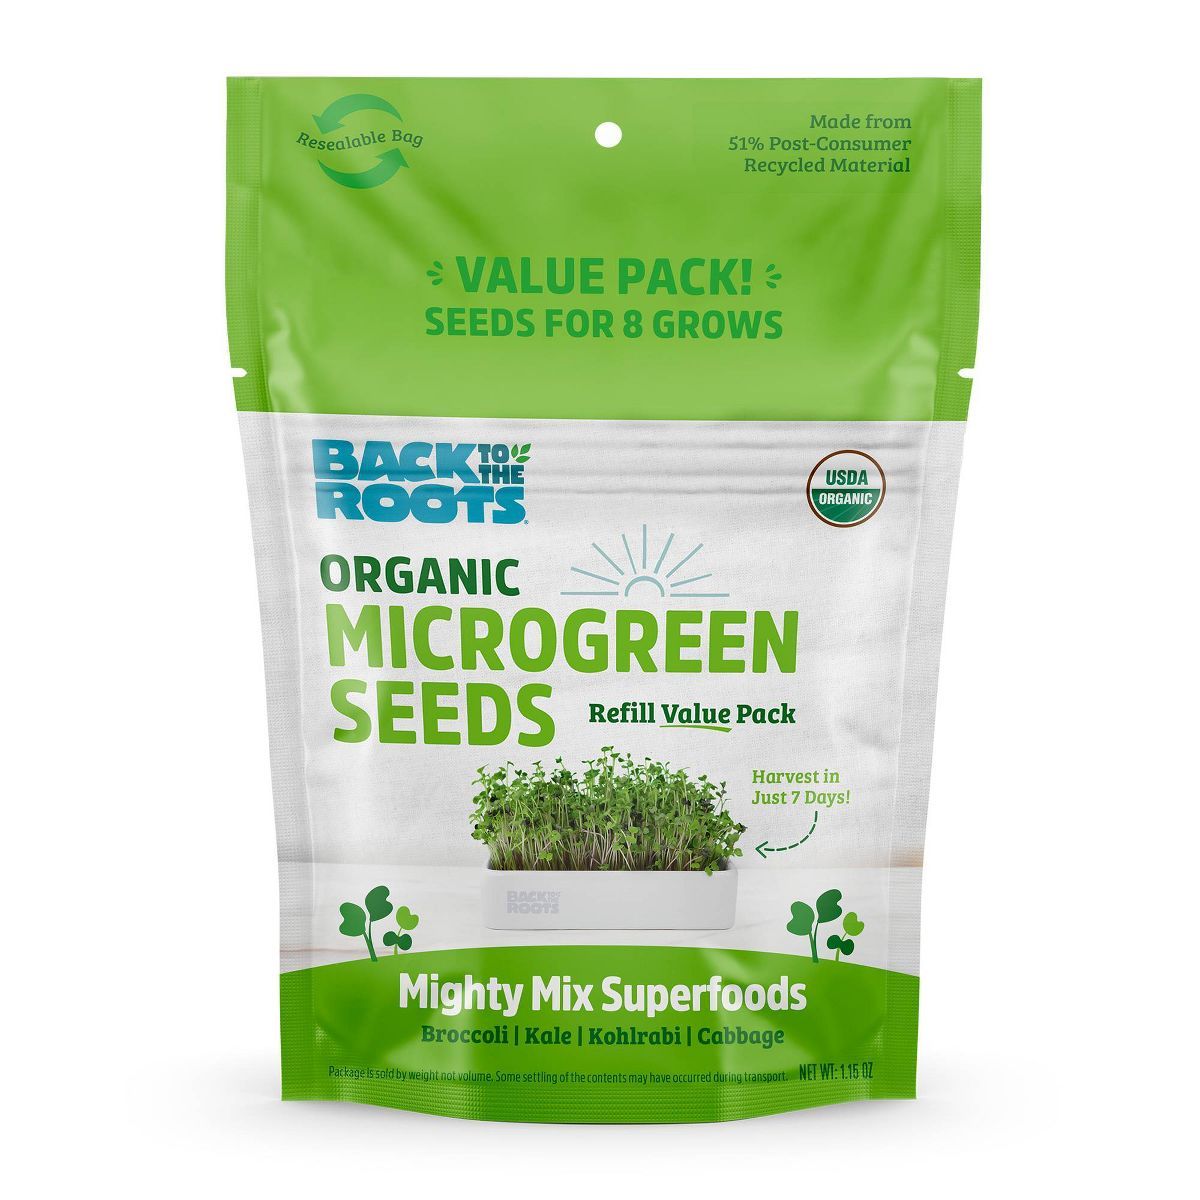 Back to the Roots Organic Microgreen Seeds Refill Value Pack | Target